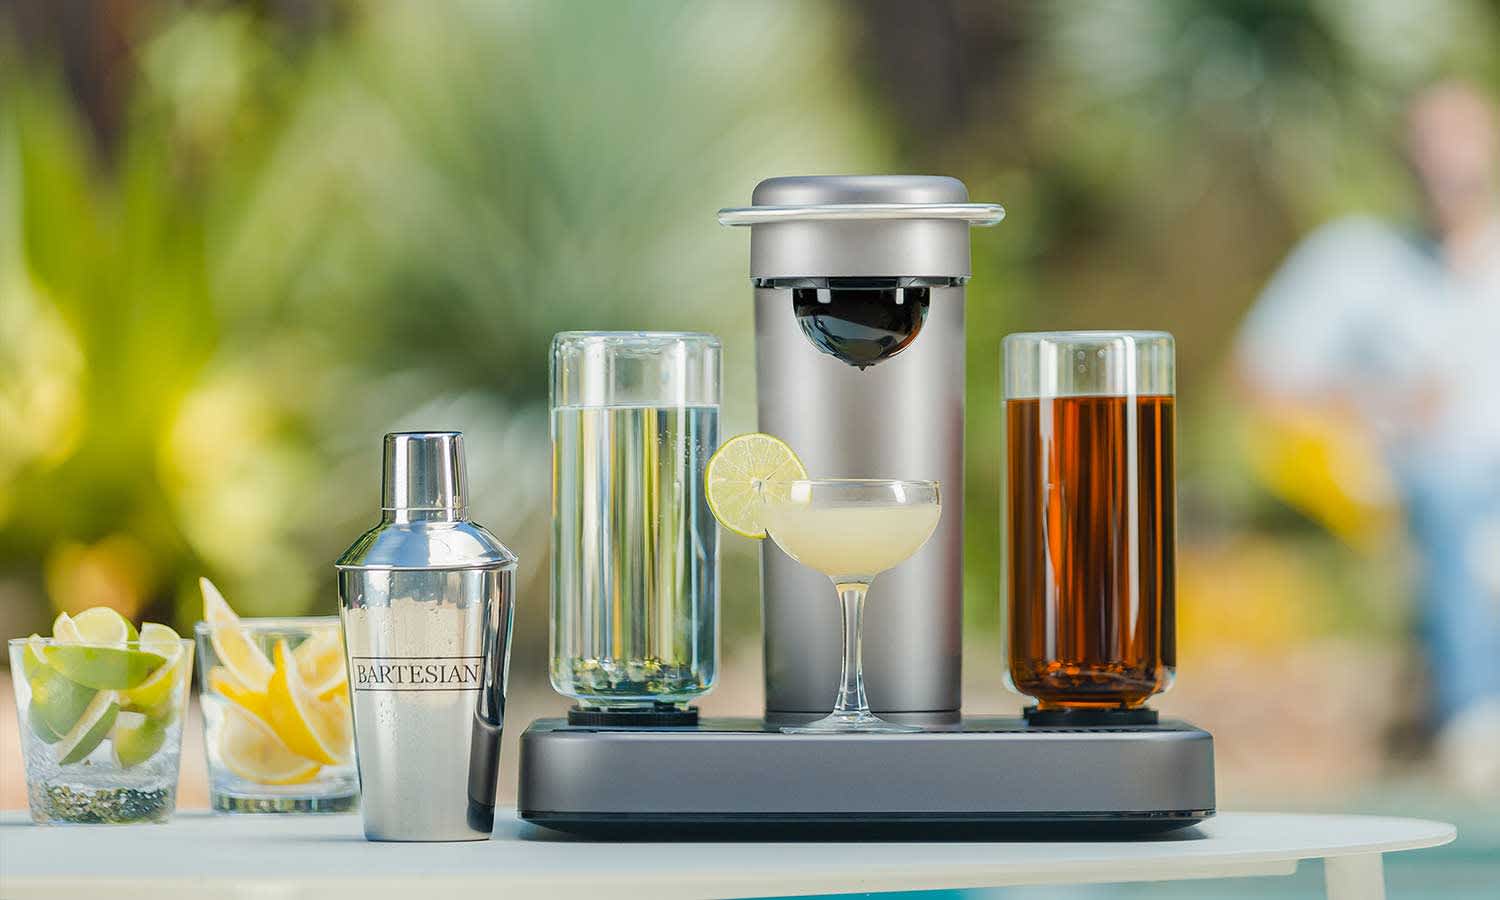 A Capsule Cocktail Machine Exists to Pour You Instant Margaritas